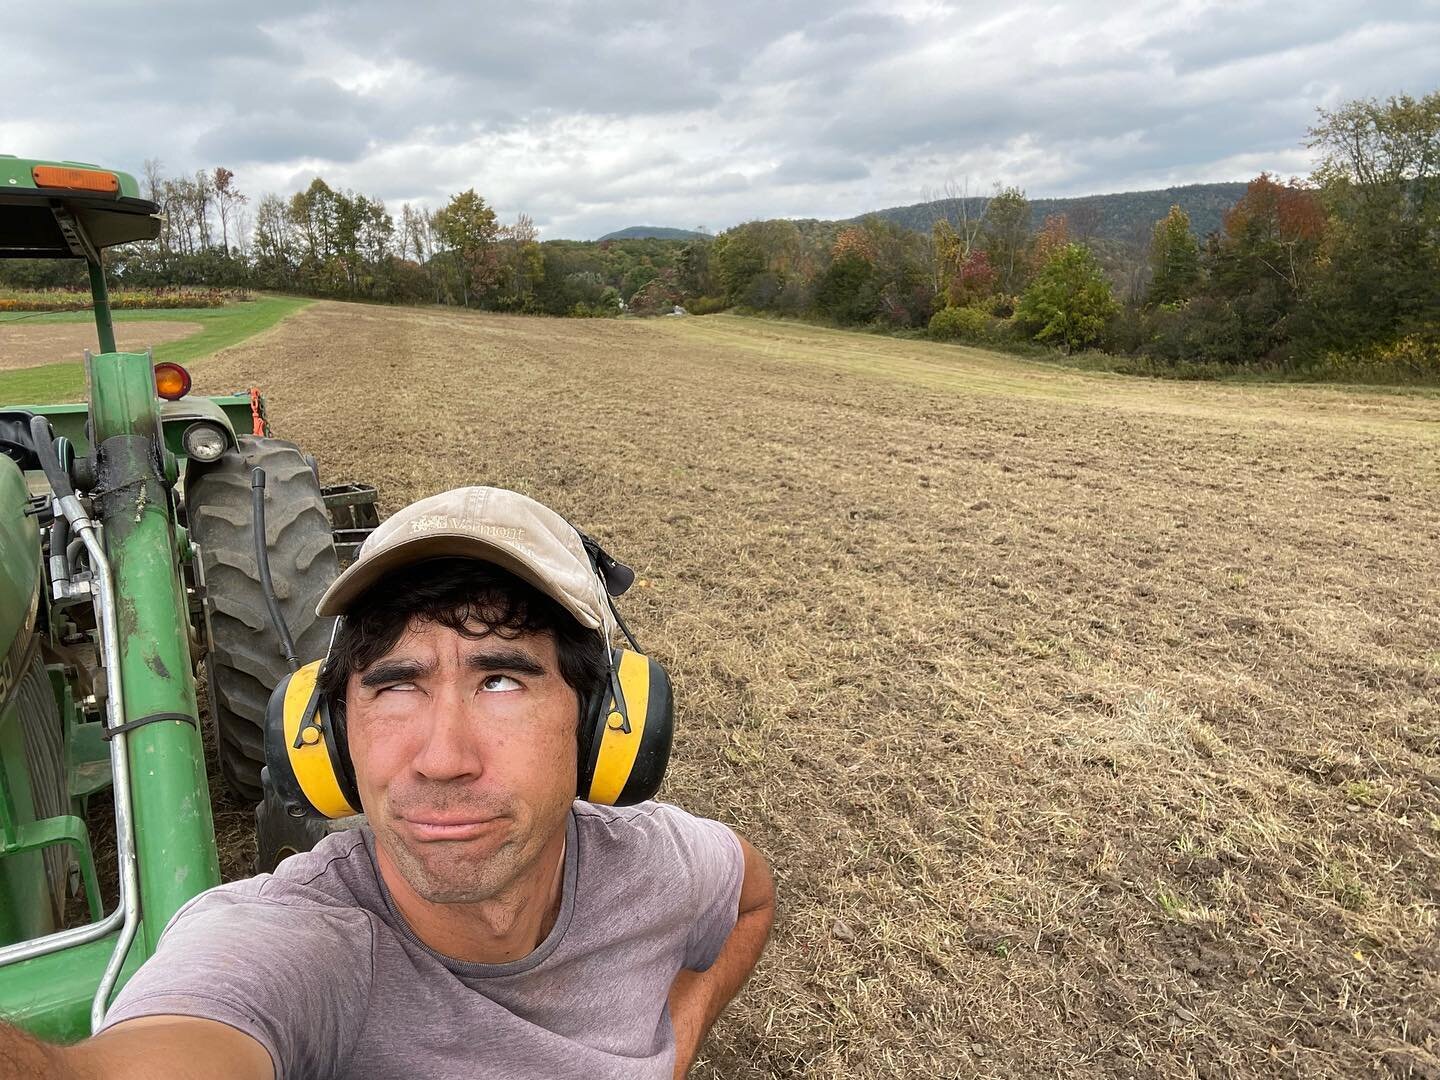 Don&rsquo;t get me wrong, I love tractor work and I love opening up ground and inhaling clay dust and diesel fumes and racing storm clouds as much as the next knucklehead farmer, but, if I&rsquo;m honest with myself, the plan to tear up this field an